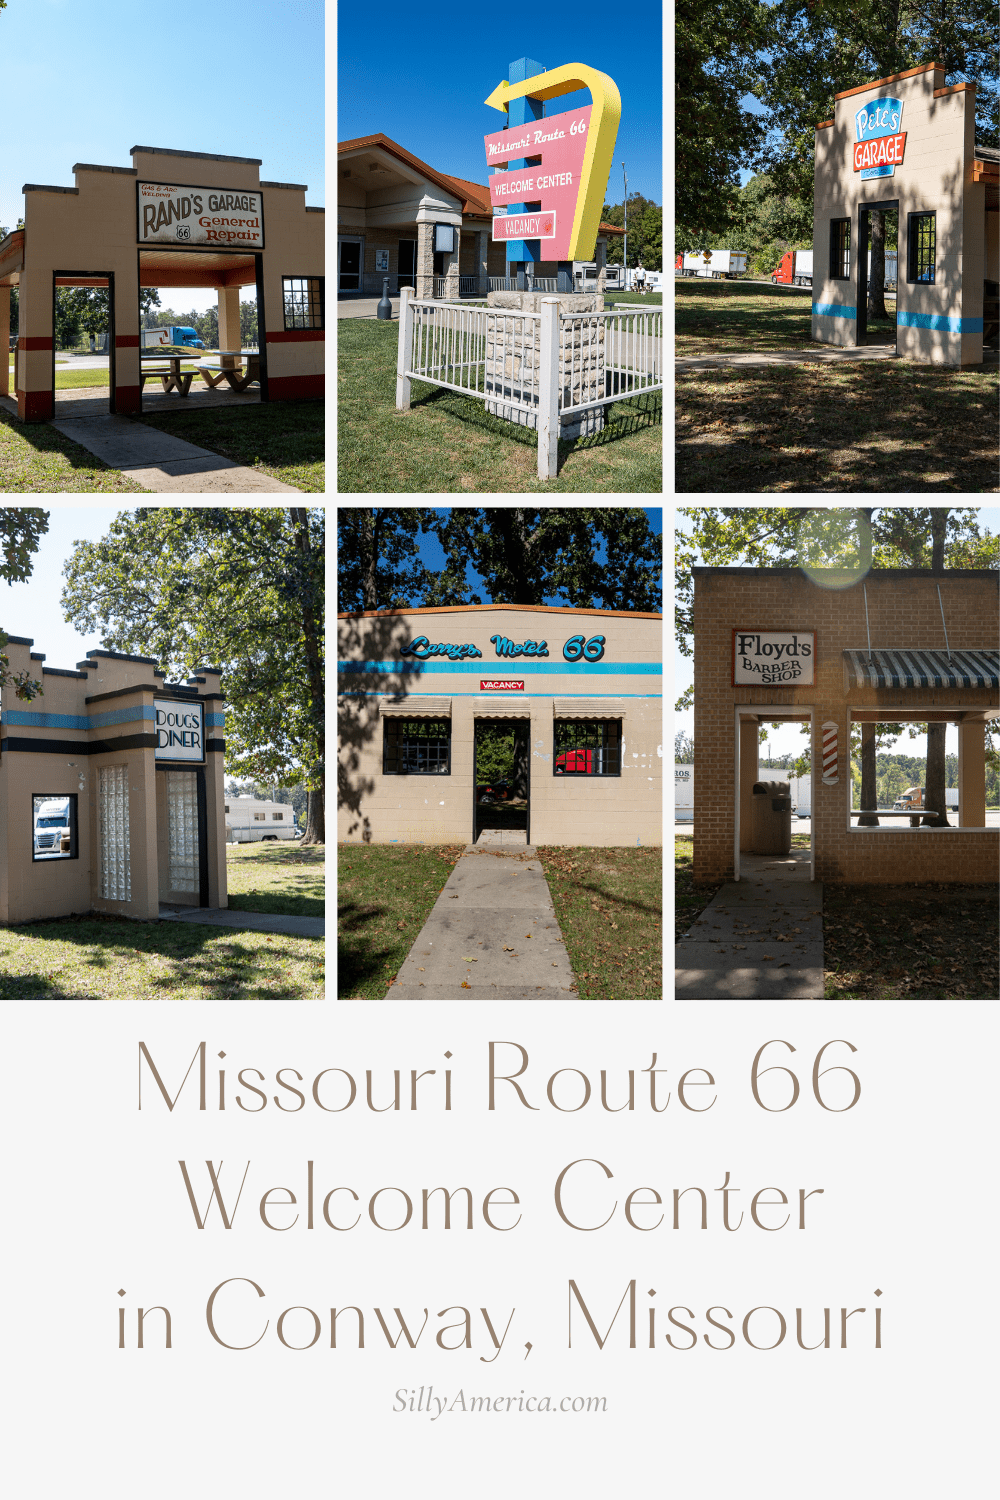 Travel old Route 66 without leaving Missouri...and get some snacks and a bathroom break while you’re there. The Missouri Route 66 Welcome Center in Conway has a definitive theme alongside their amenities. Visit this Route 66 themed rest stop in Missouri on your next road trip.  #RoadTrips #RoadTripStop #Route66 #Route66RoadTrip #MissouriRoute66 #Missouri #MissouriRoadTrip #MissouriRoadsideAttractions #RoadsideAttractions #RoadsideAttraction #RoadsideAmerica #RoadTrip